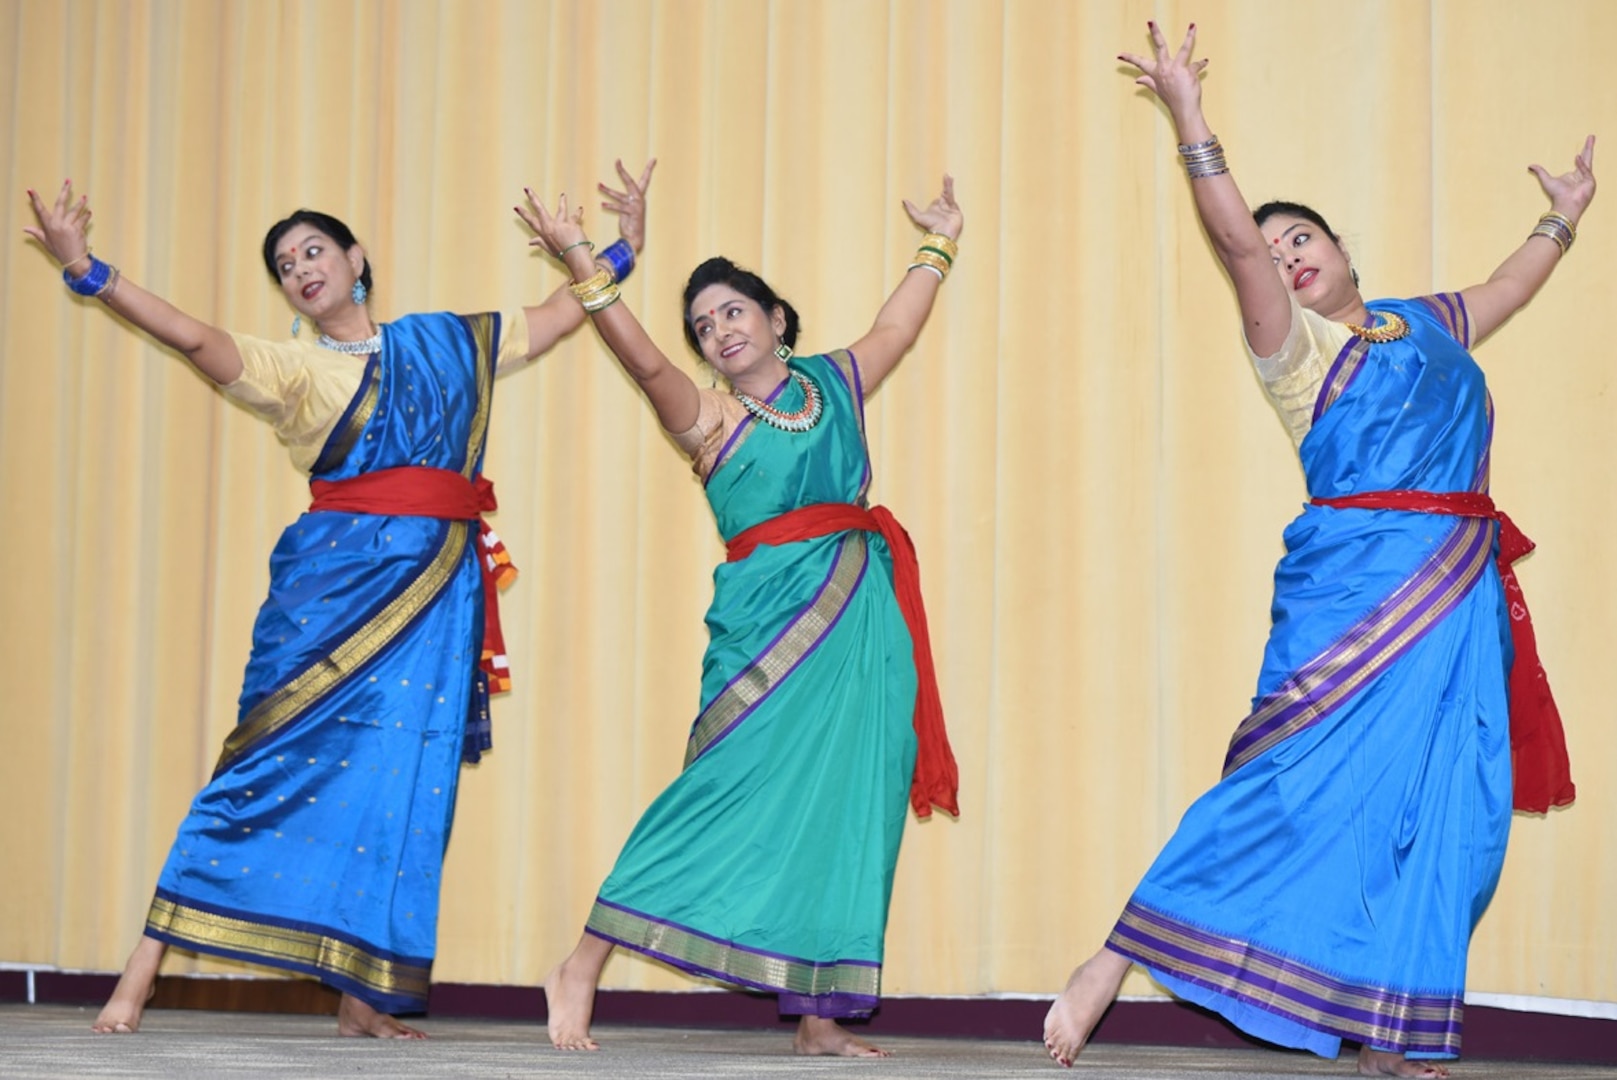 Sonali Sarkar, Saheli Datta and Pampa Bhattacharya performing a dance from the state of West Bengal at the Asian American and Pacific Islander Heritage Month Commemoration for Joint Base San Antonio at Blesse Auditorium at JBSA-Fort Sam Houston May 22.